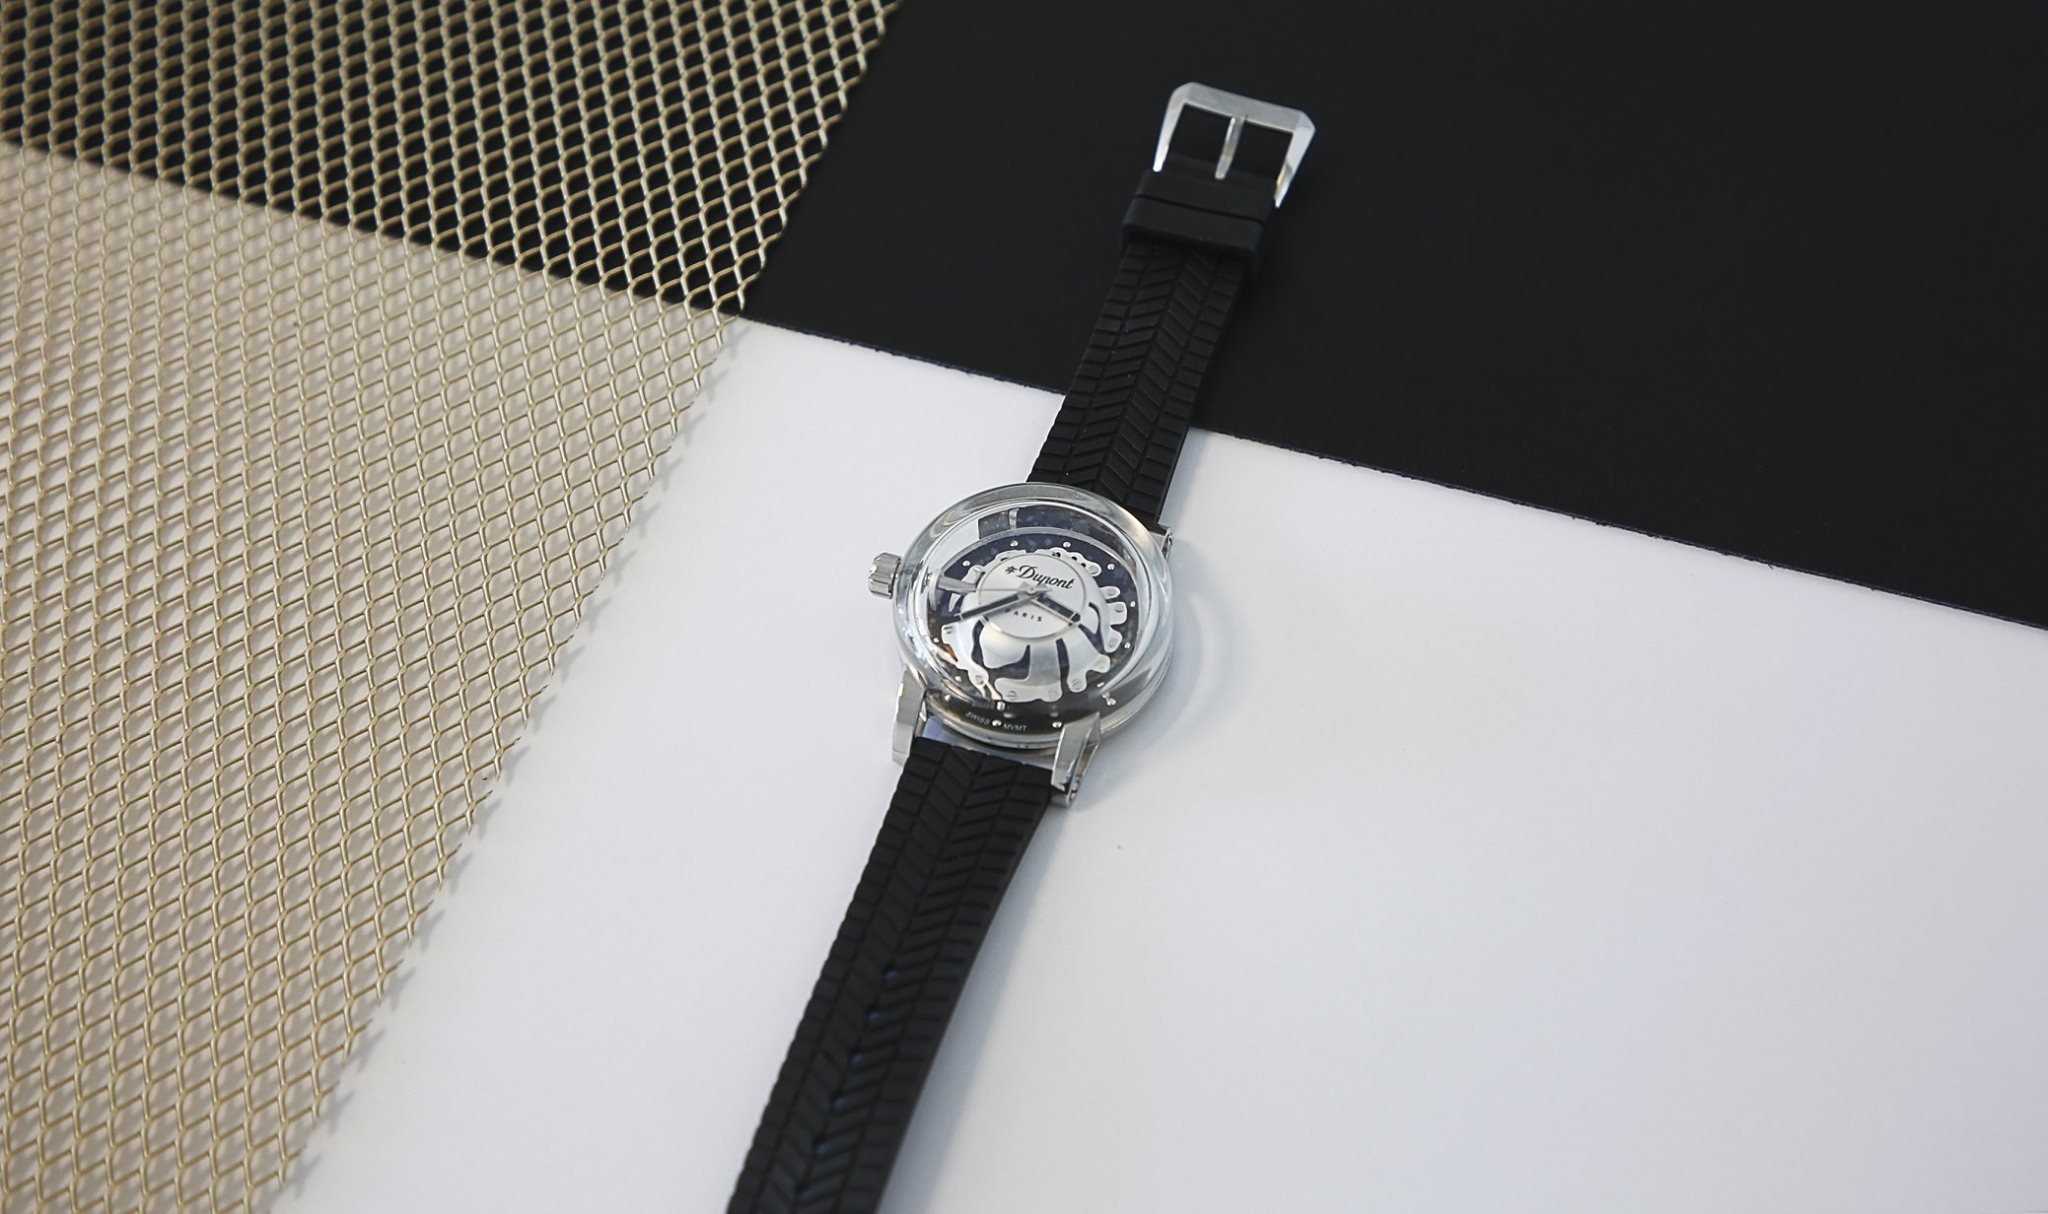 Every detail matters, express your personality with our "Hyperdome" watch.